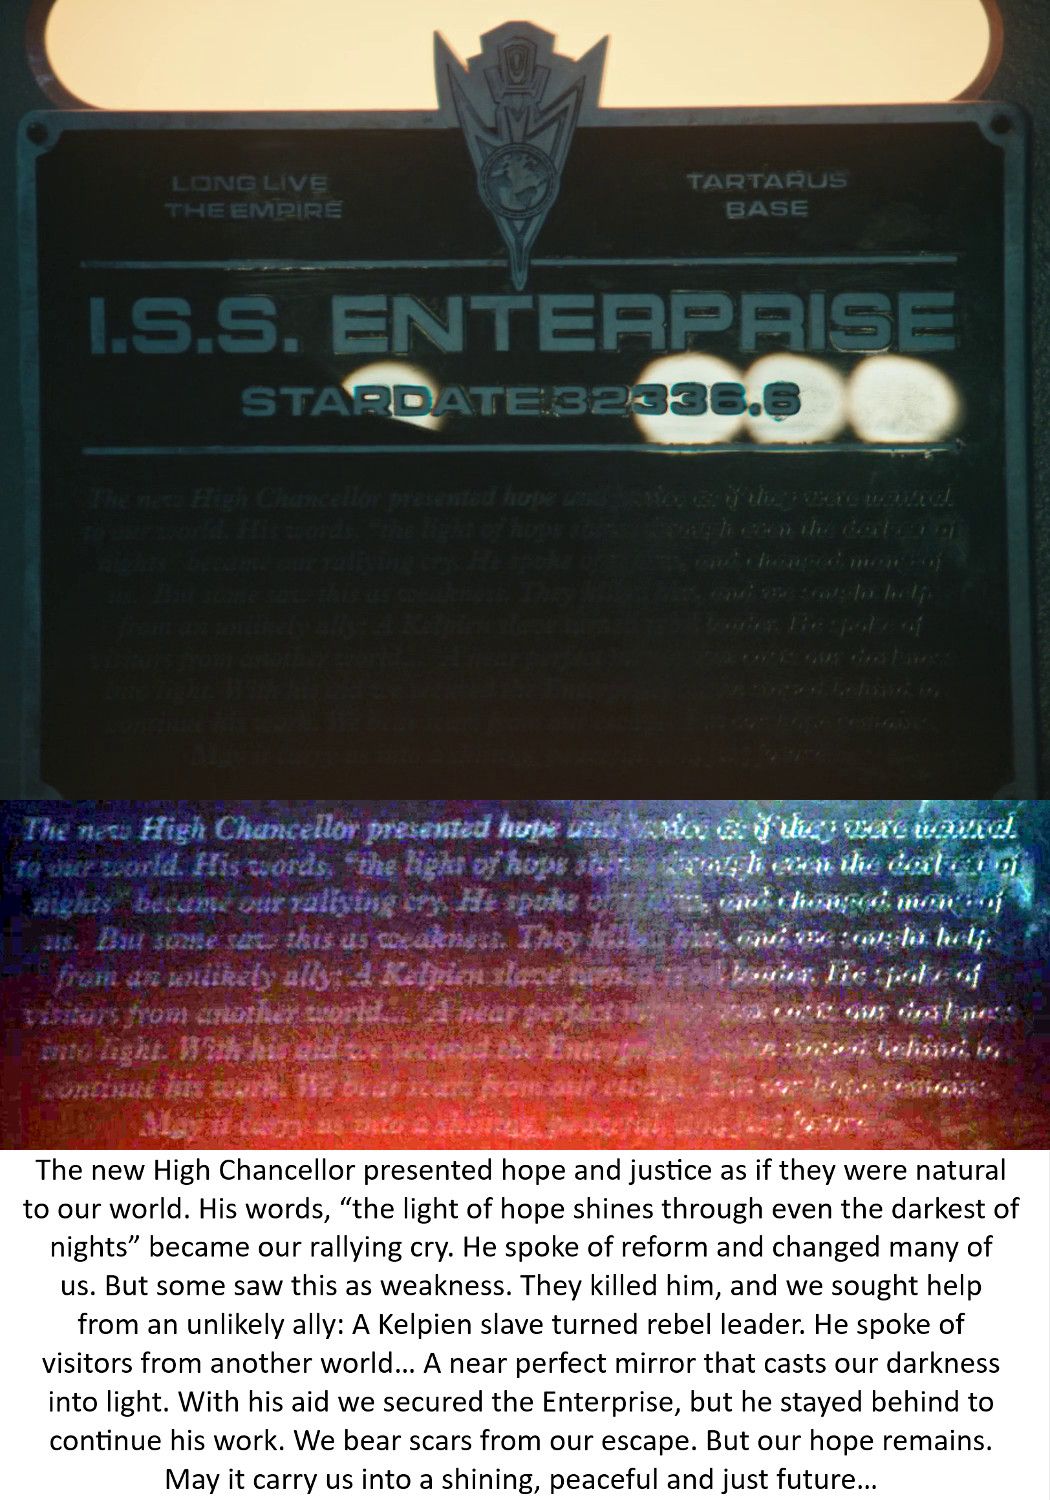 ISS Enterprise Mirror Universe history plaque from Star Trek Discovery